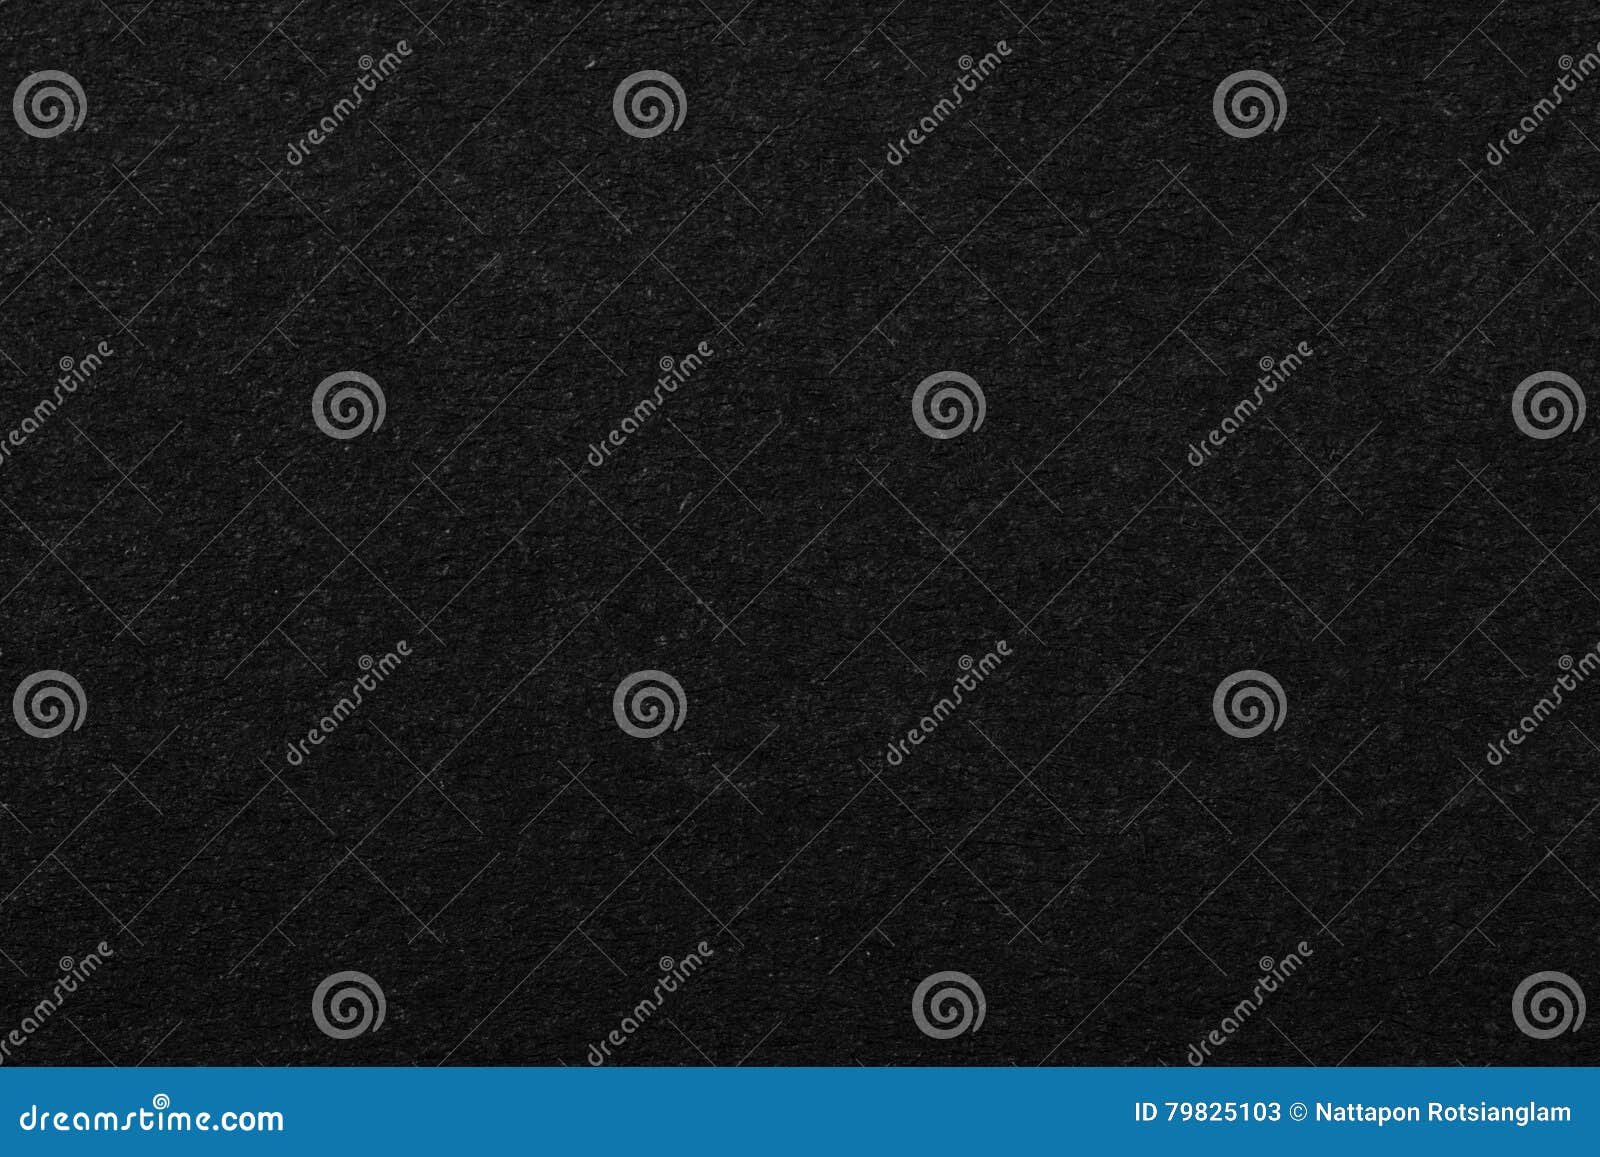 Black paper texture stock image. Image of medieval, note - 79825103